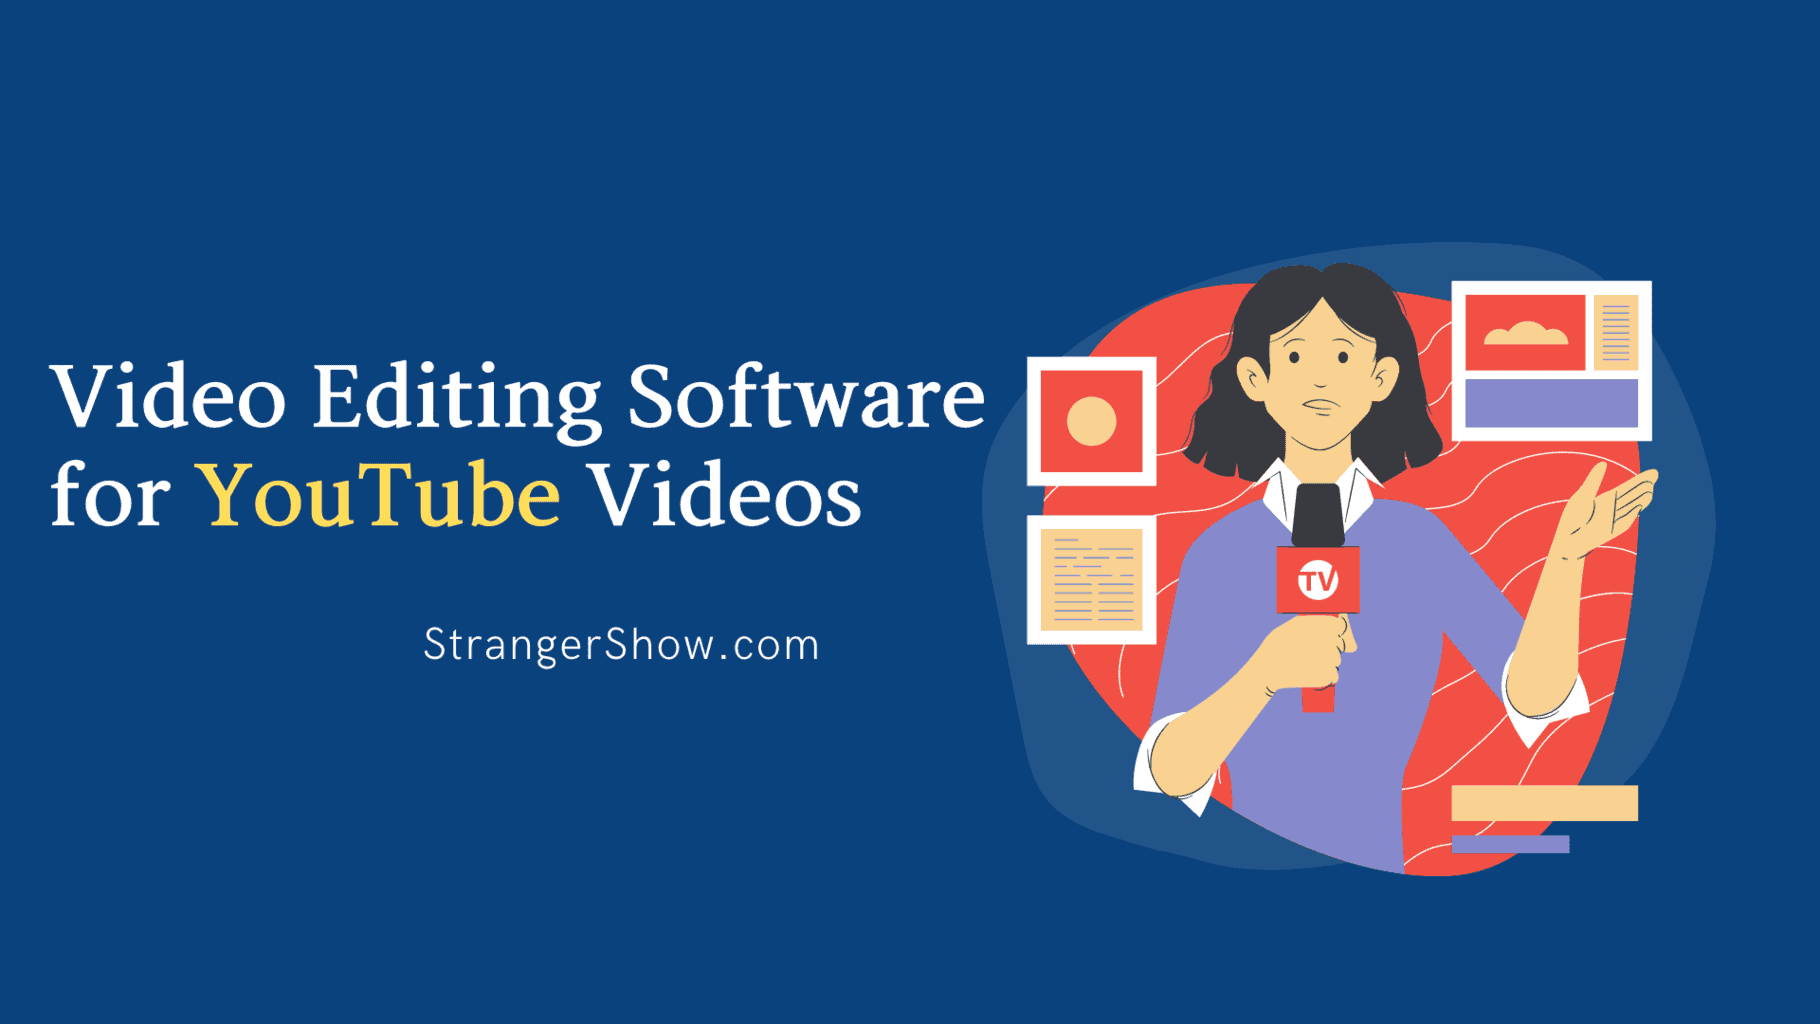 Best video editing software for YouTube videos